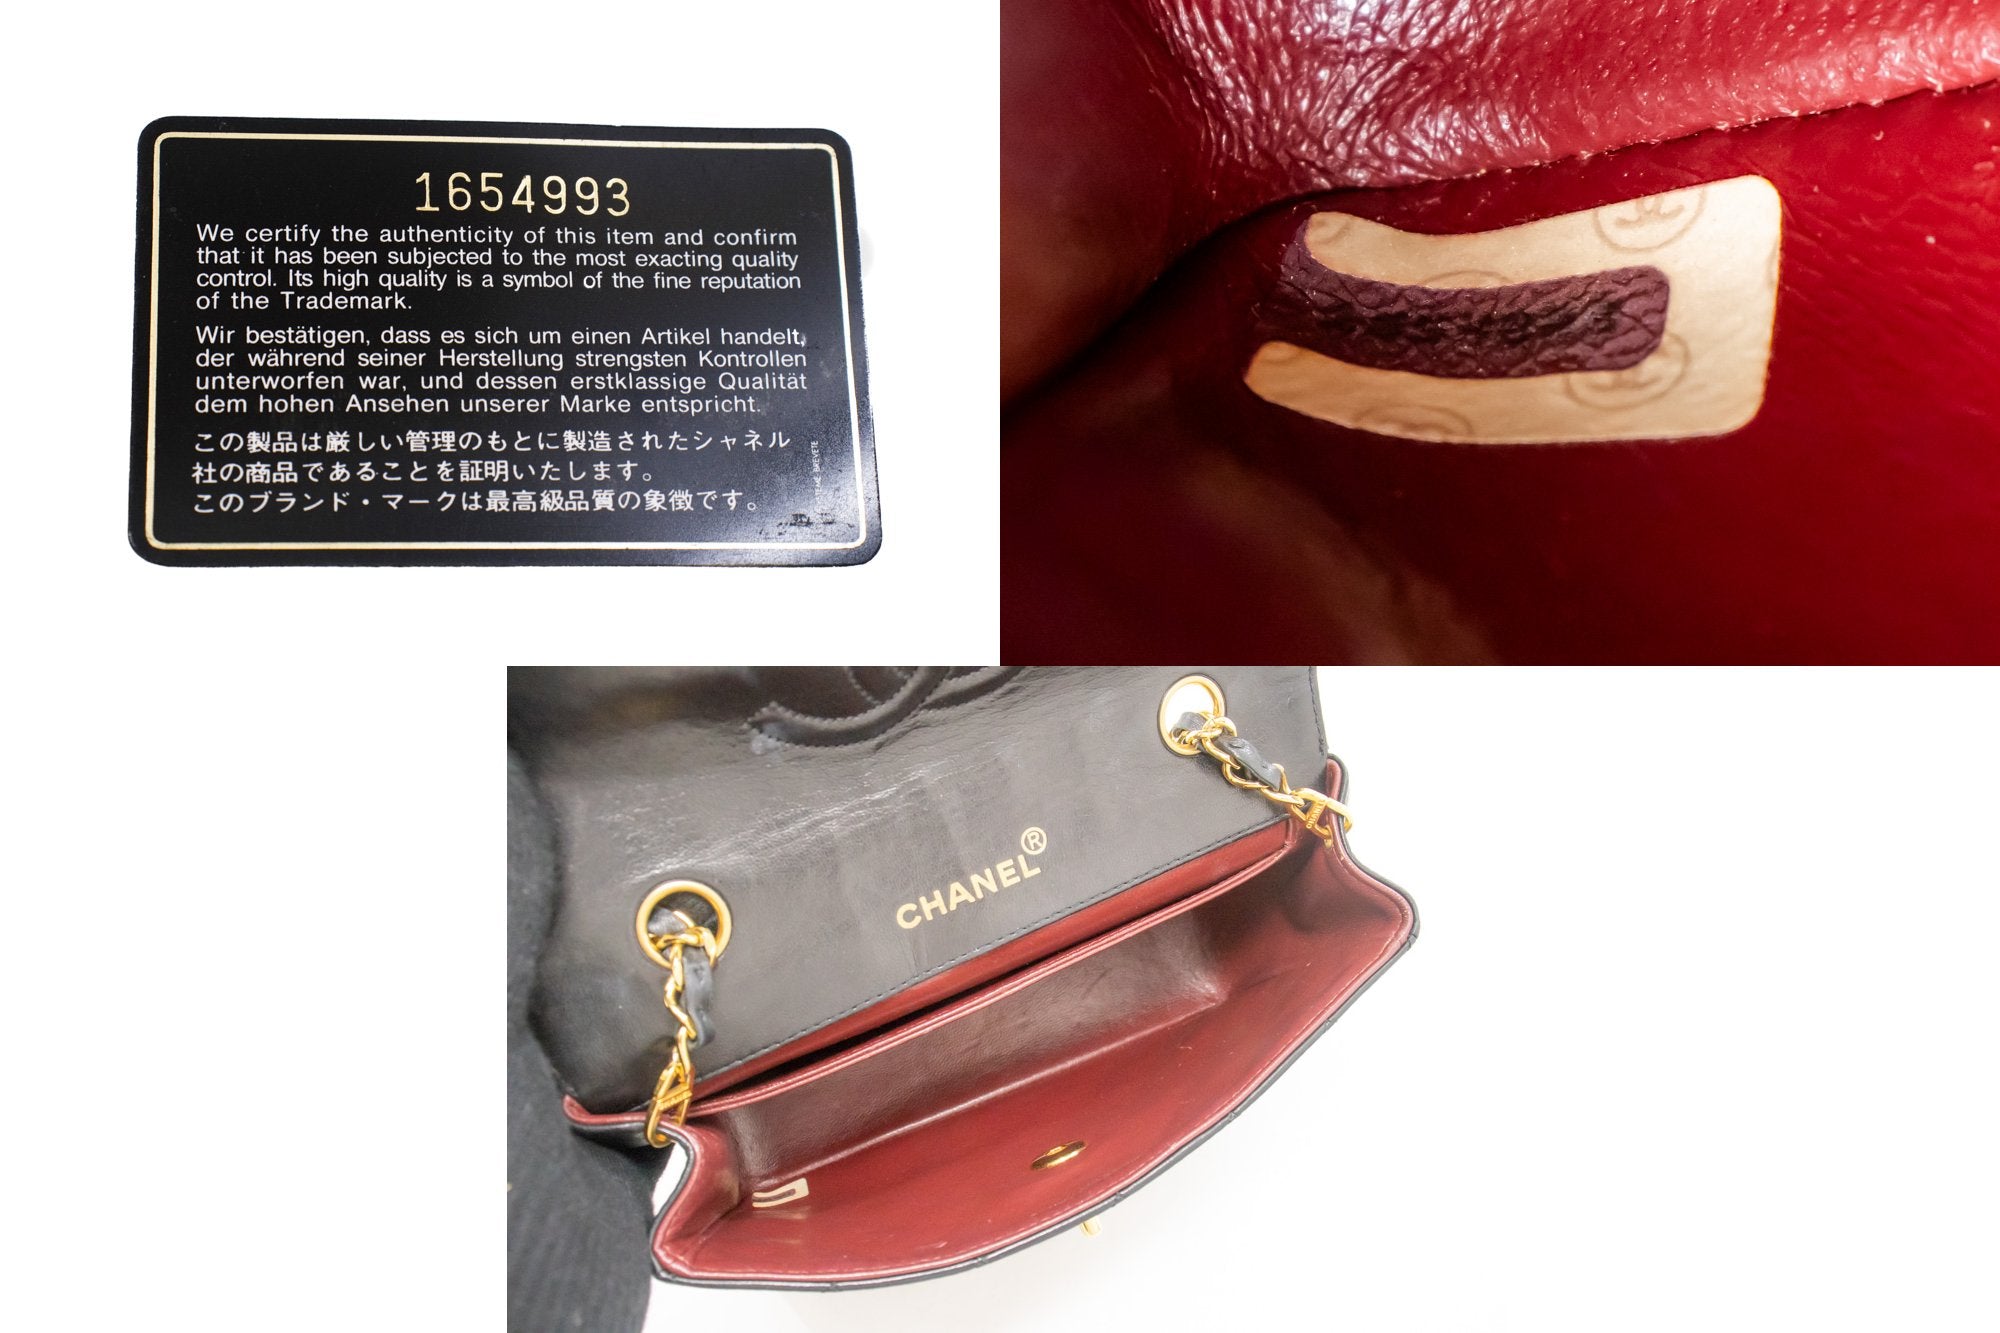 Chanel Vintage Classic Double Flap Lambskin Medium Bag in Lipstick Red with  Gold Hardware